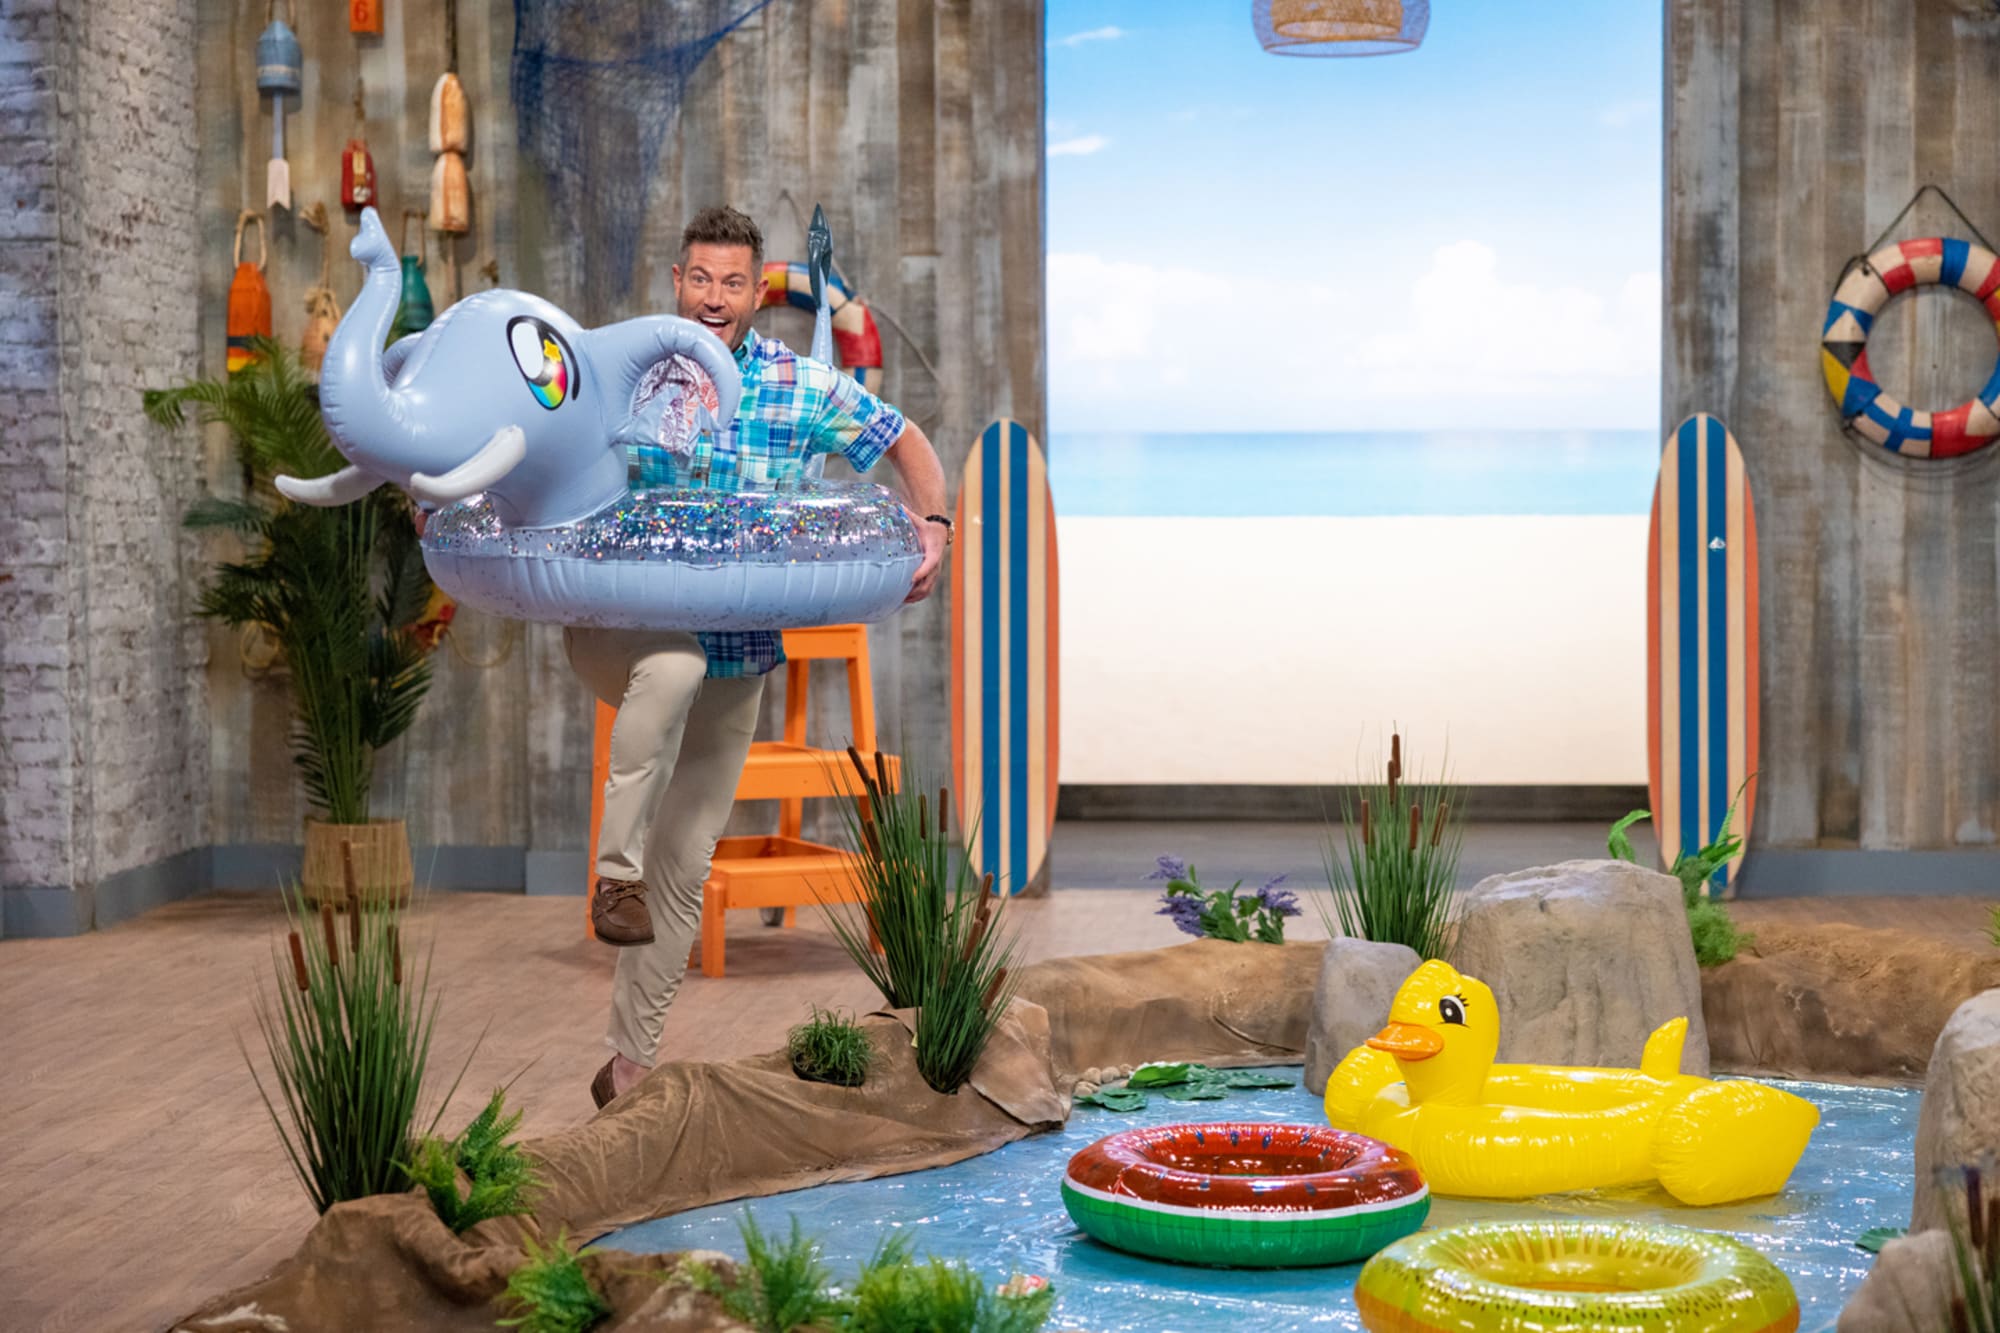 Summer Baking Championship premiere Ready to take a dip in the water?